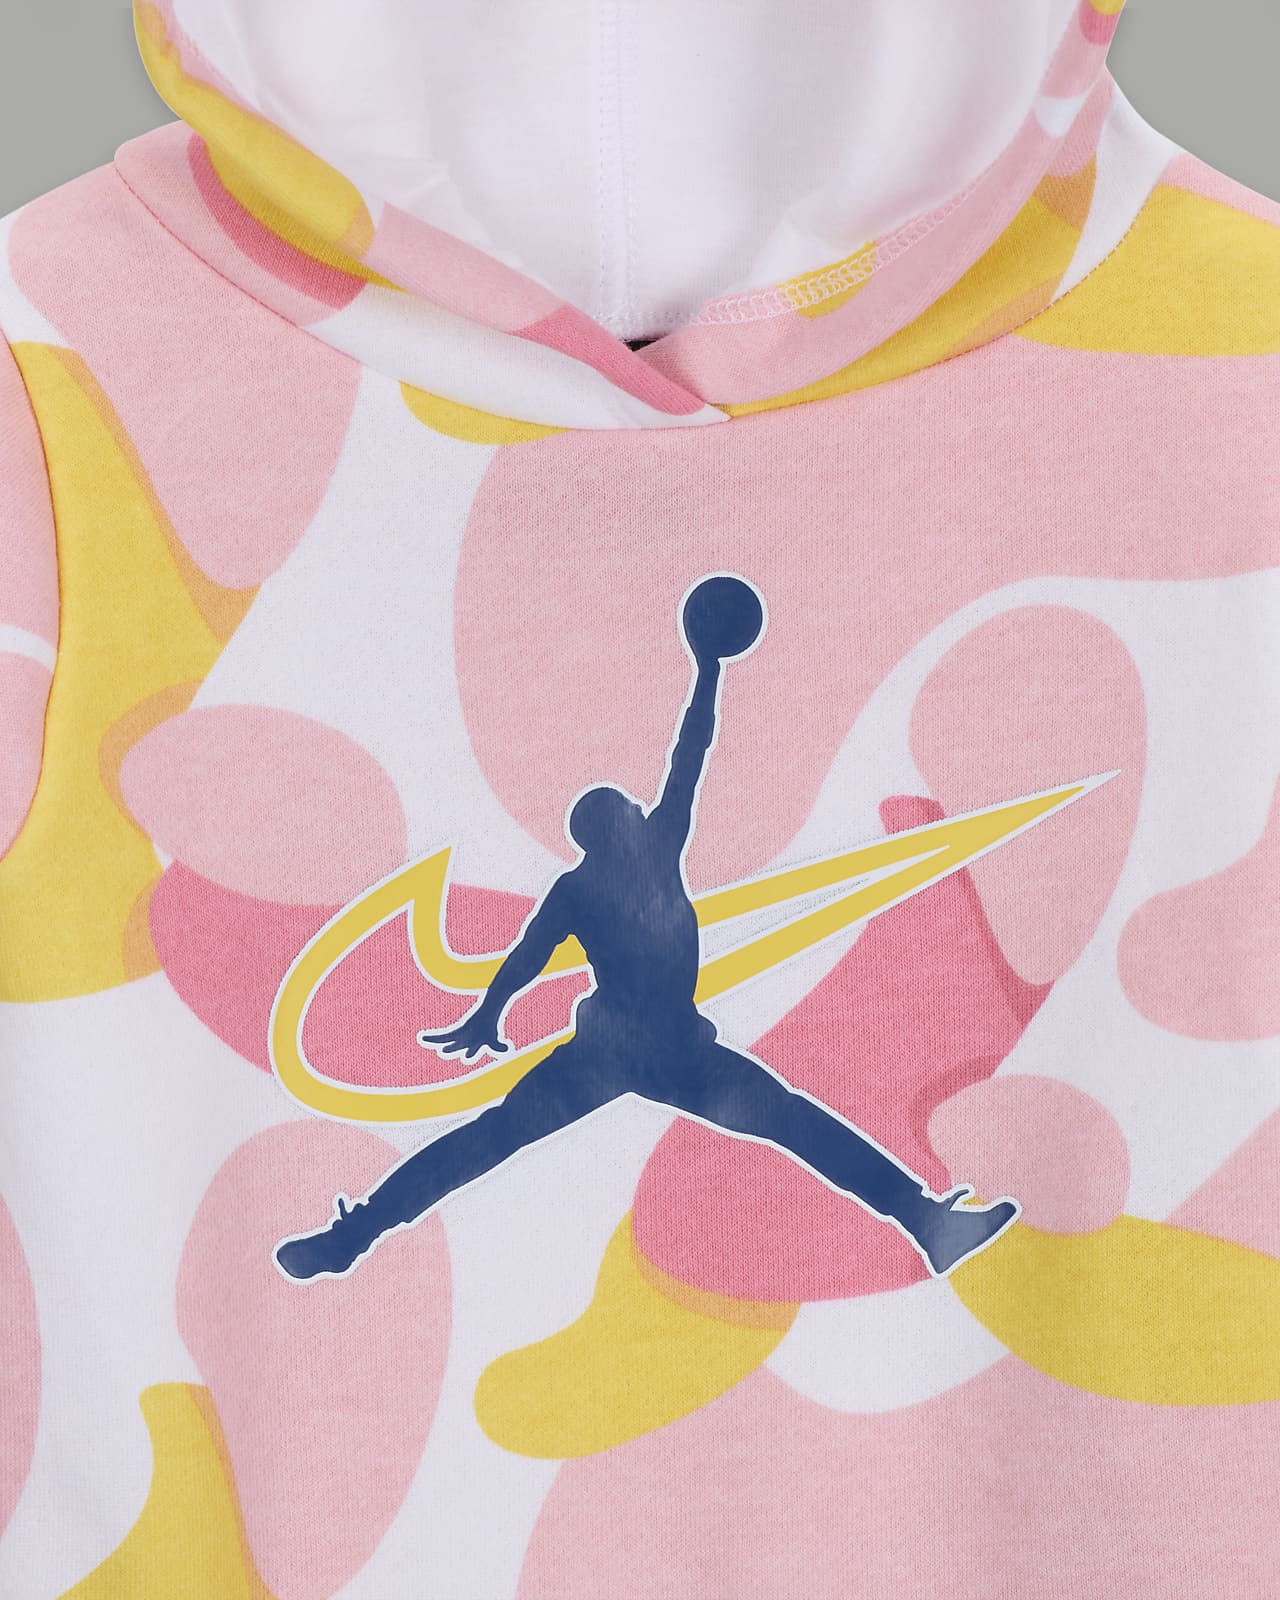 Buy Nike Pink Little Kids Cotton Leggings from Next Luxembourg